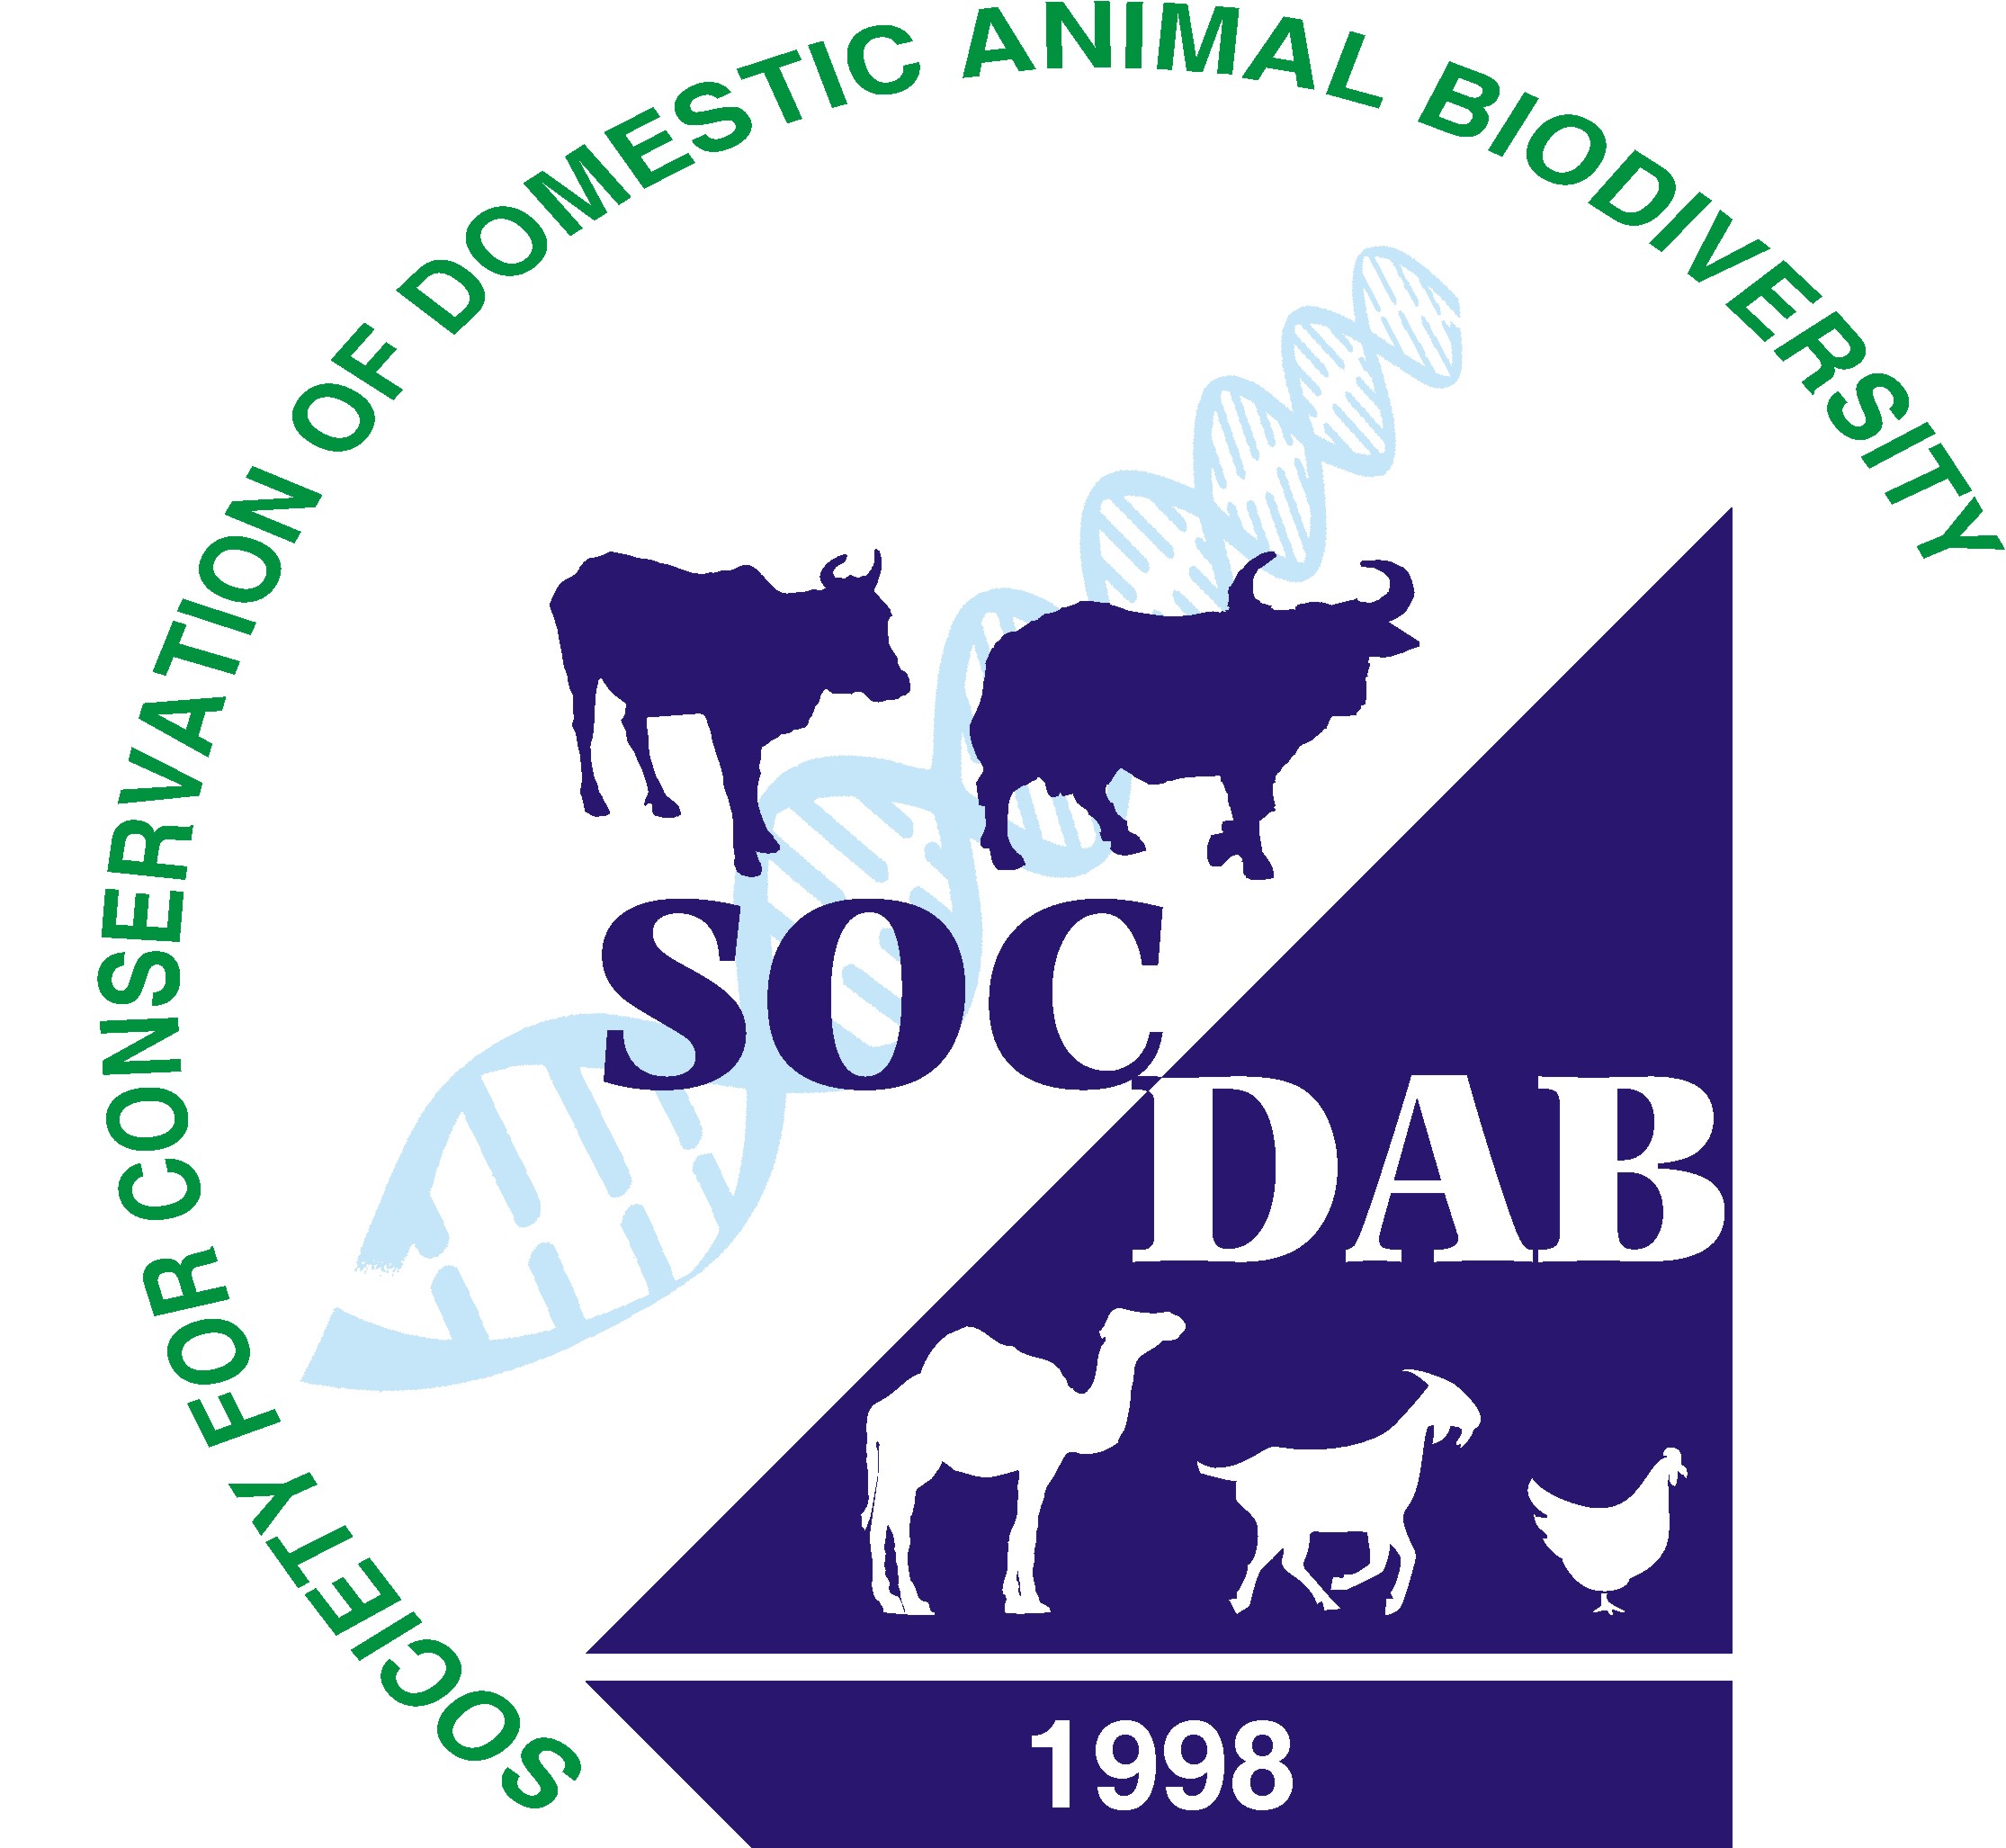 Society For Conservation of Domestic Animal Biodiversity